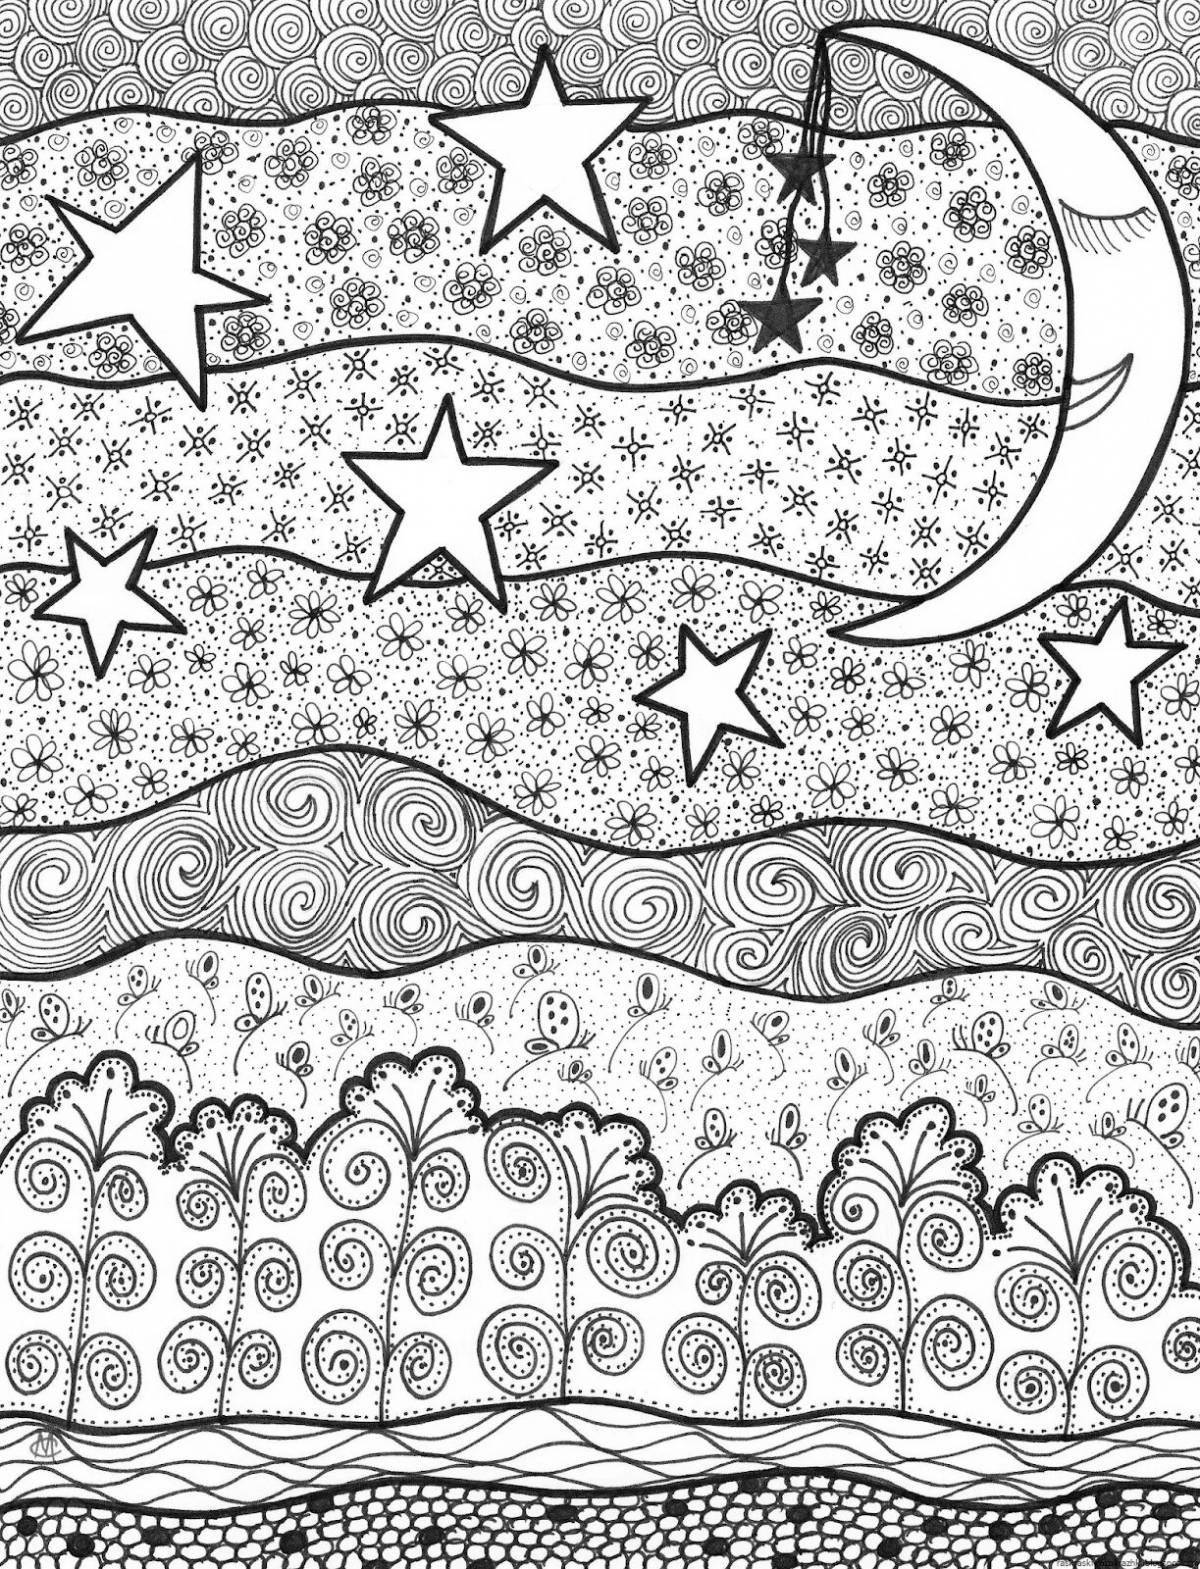 Adorable night sky coloring page